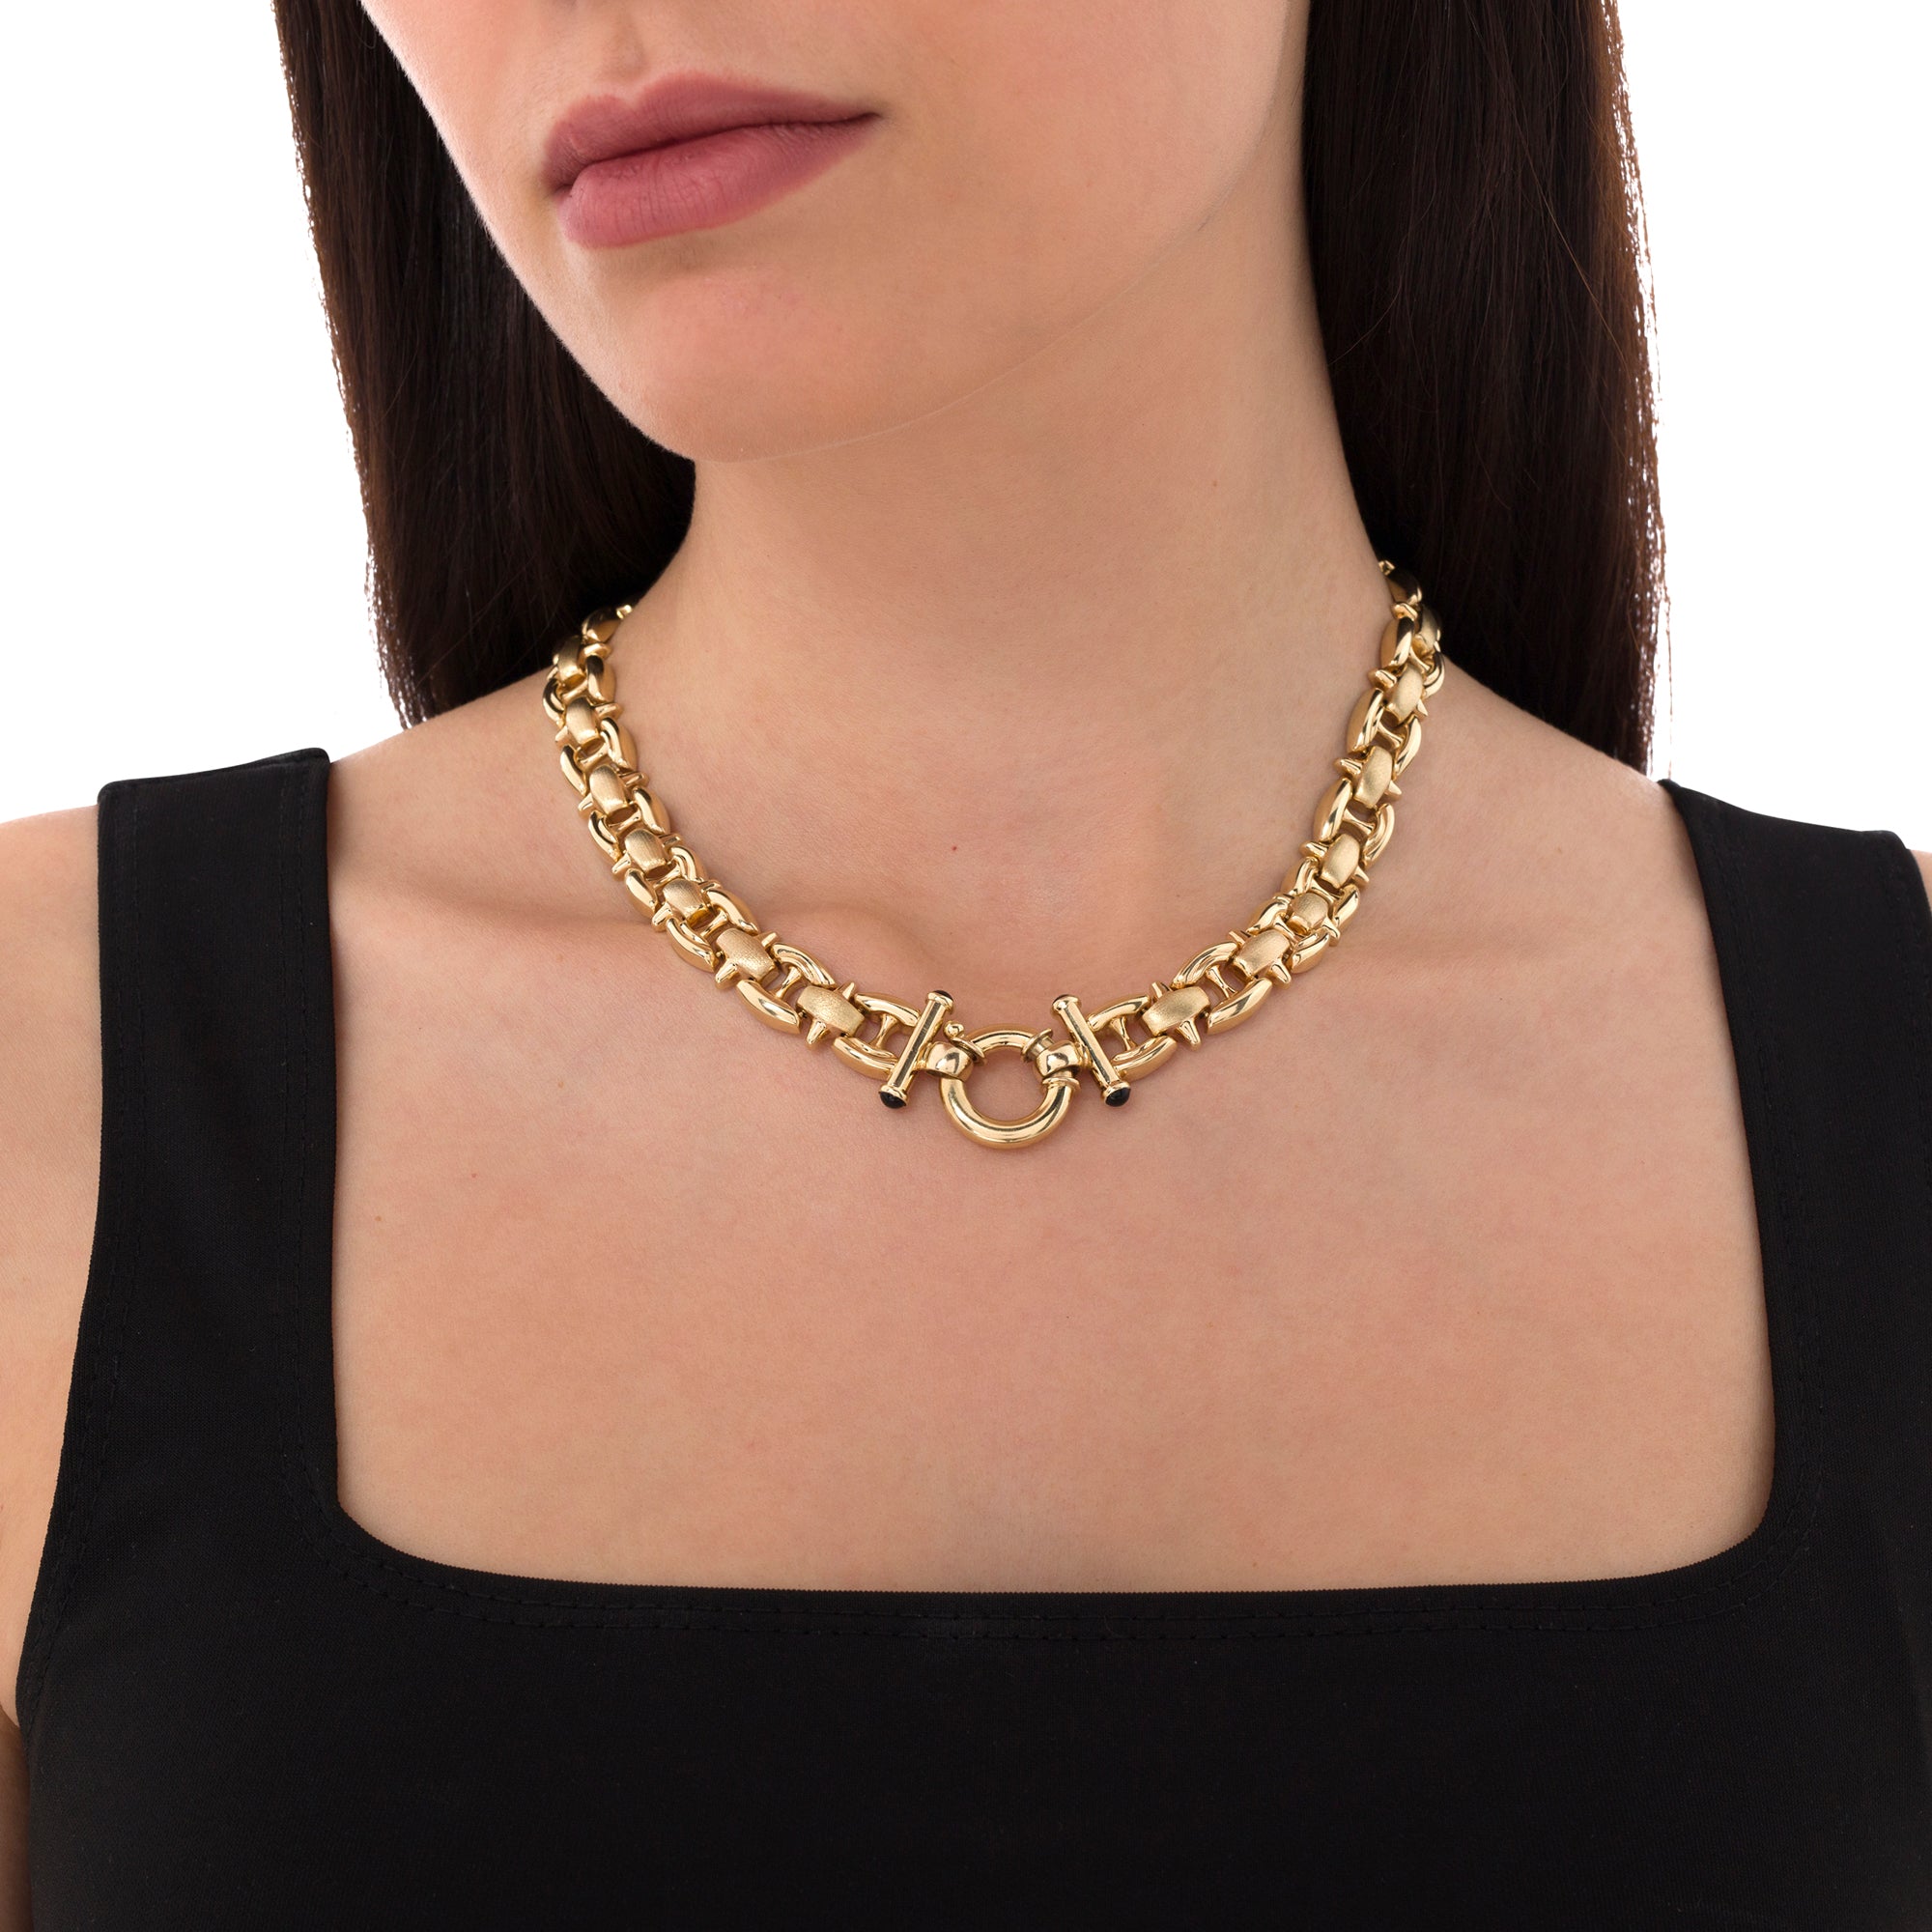 YazJewels Contemporary Italian Collar Necklace in 14ct Gold